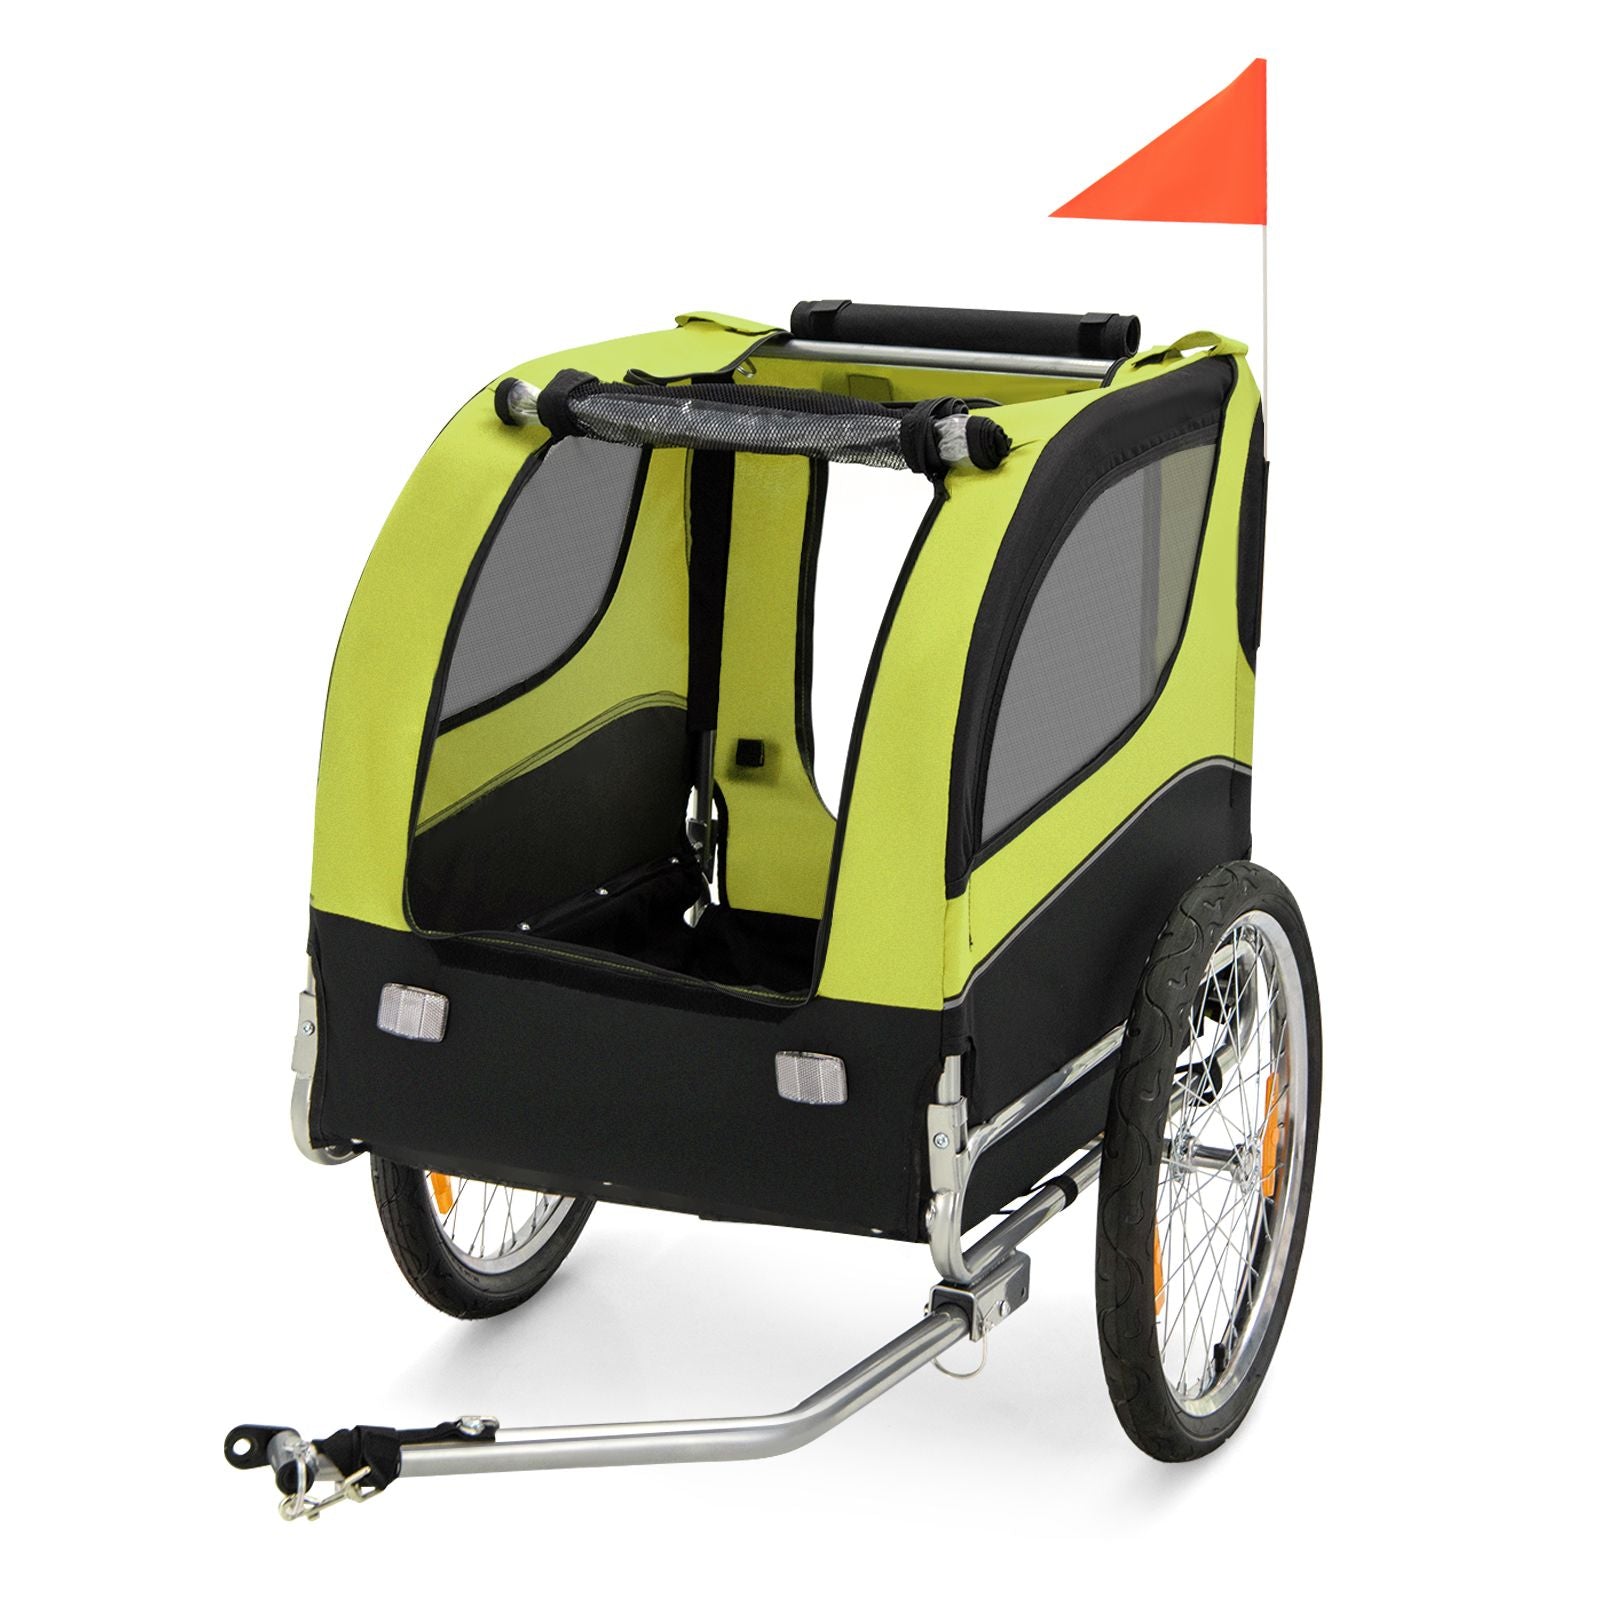 Folding Pet Bike Trailer with 3 Zippered Doors and 8 Reflectors